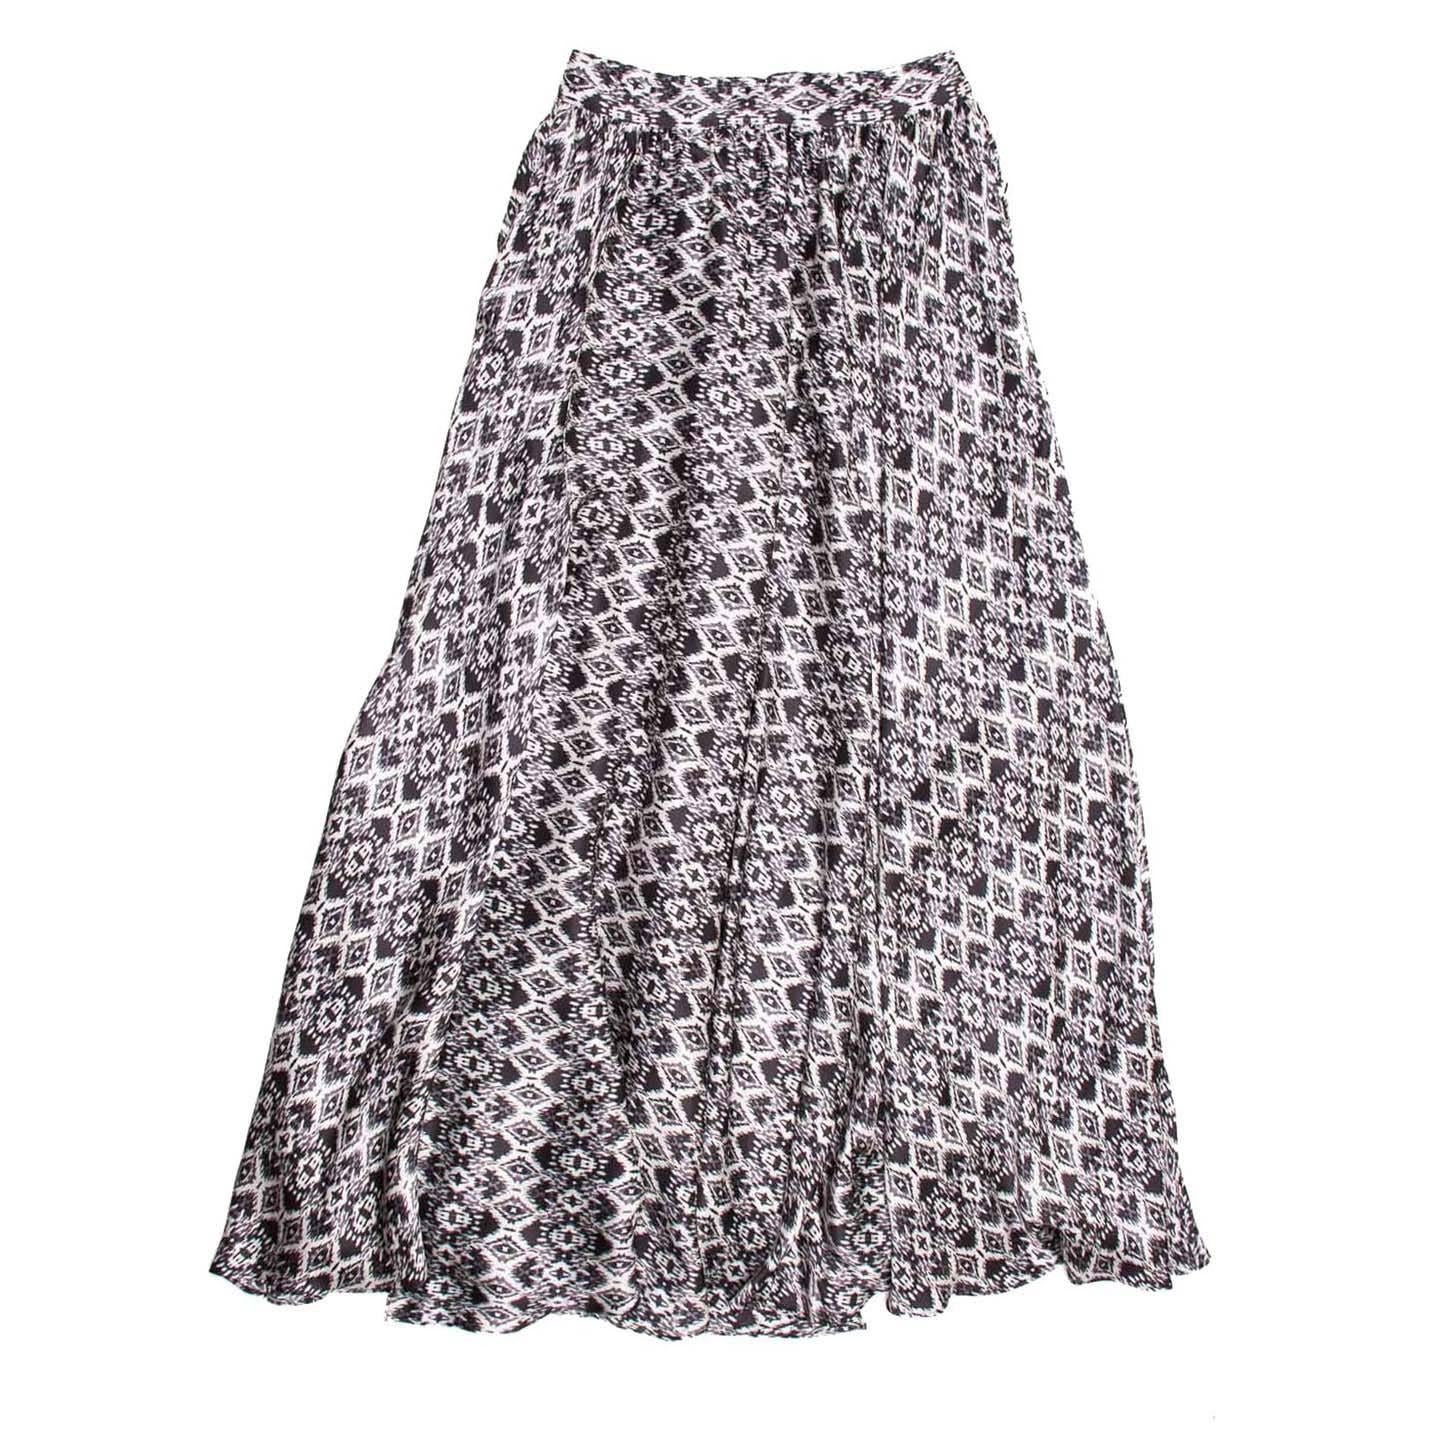 Floor length skirt in a black and white ethnic print. Gathers slightly at waistband for a flowing look. Hidden zipper closure at side seam. New with Tags.

Size  44 Italian sizing

Condition  Excellent: never worn with tags